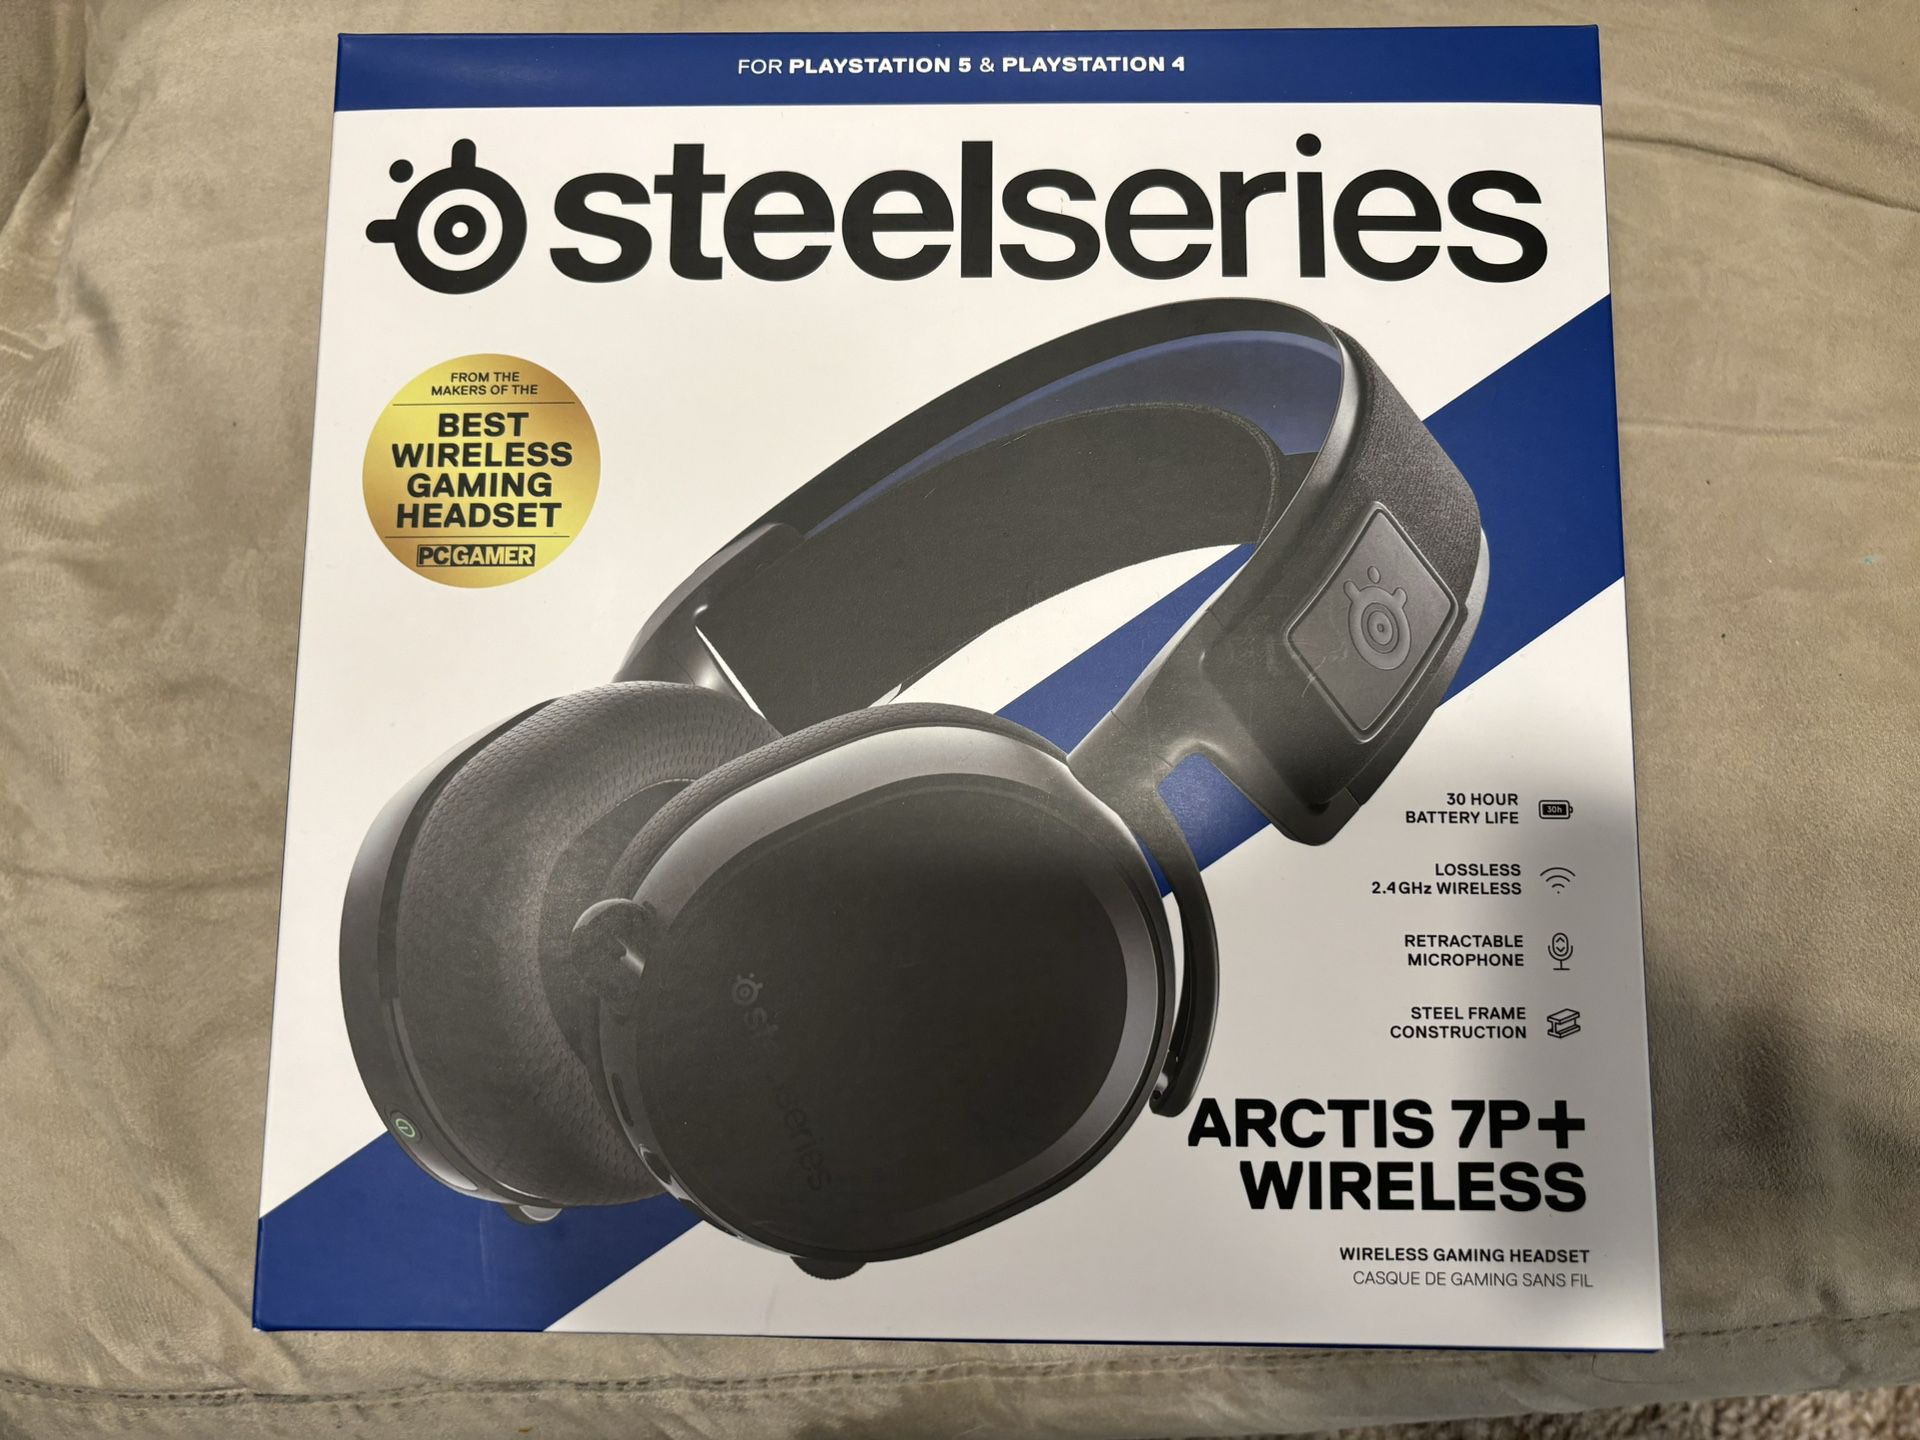 Steelseries Arctis 7P+ wireless gaming headset for PS5/PS4/PC